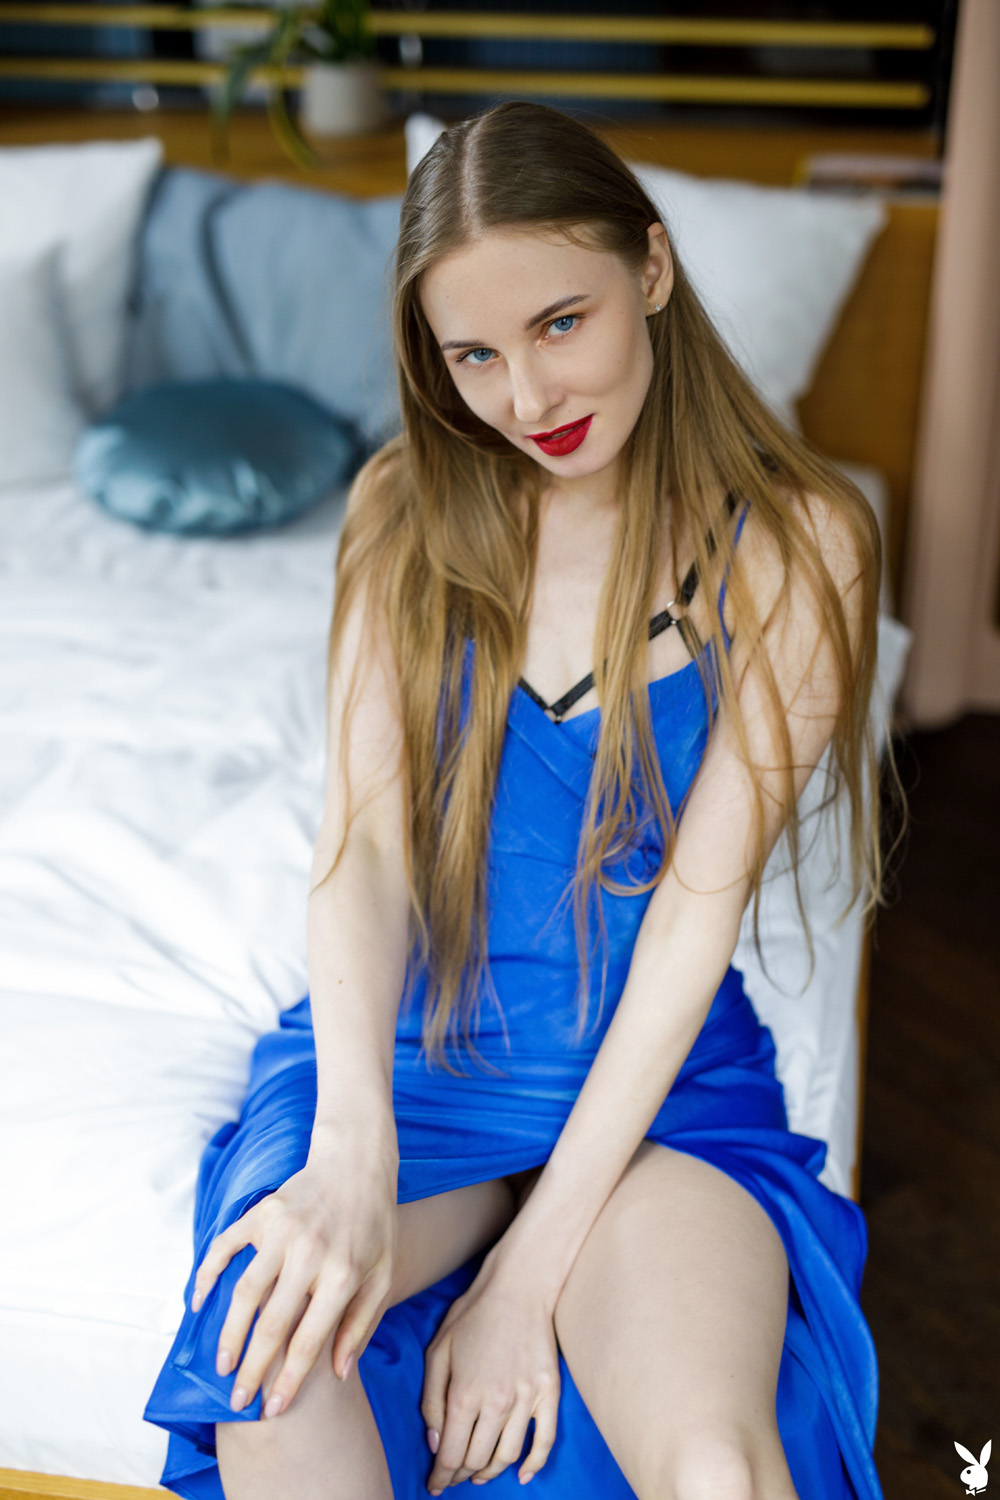 Stella seduces in a royal blue dress and kinky black lingerie